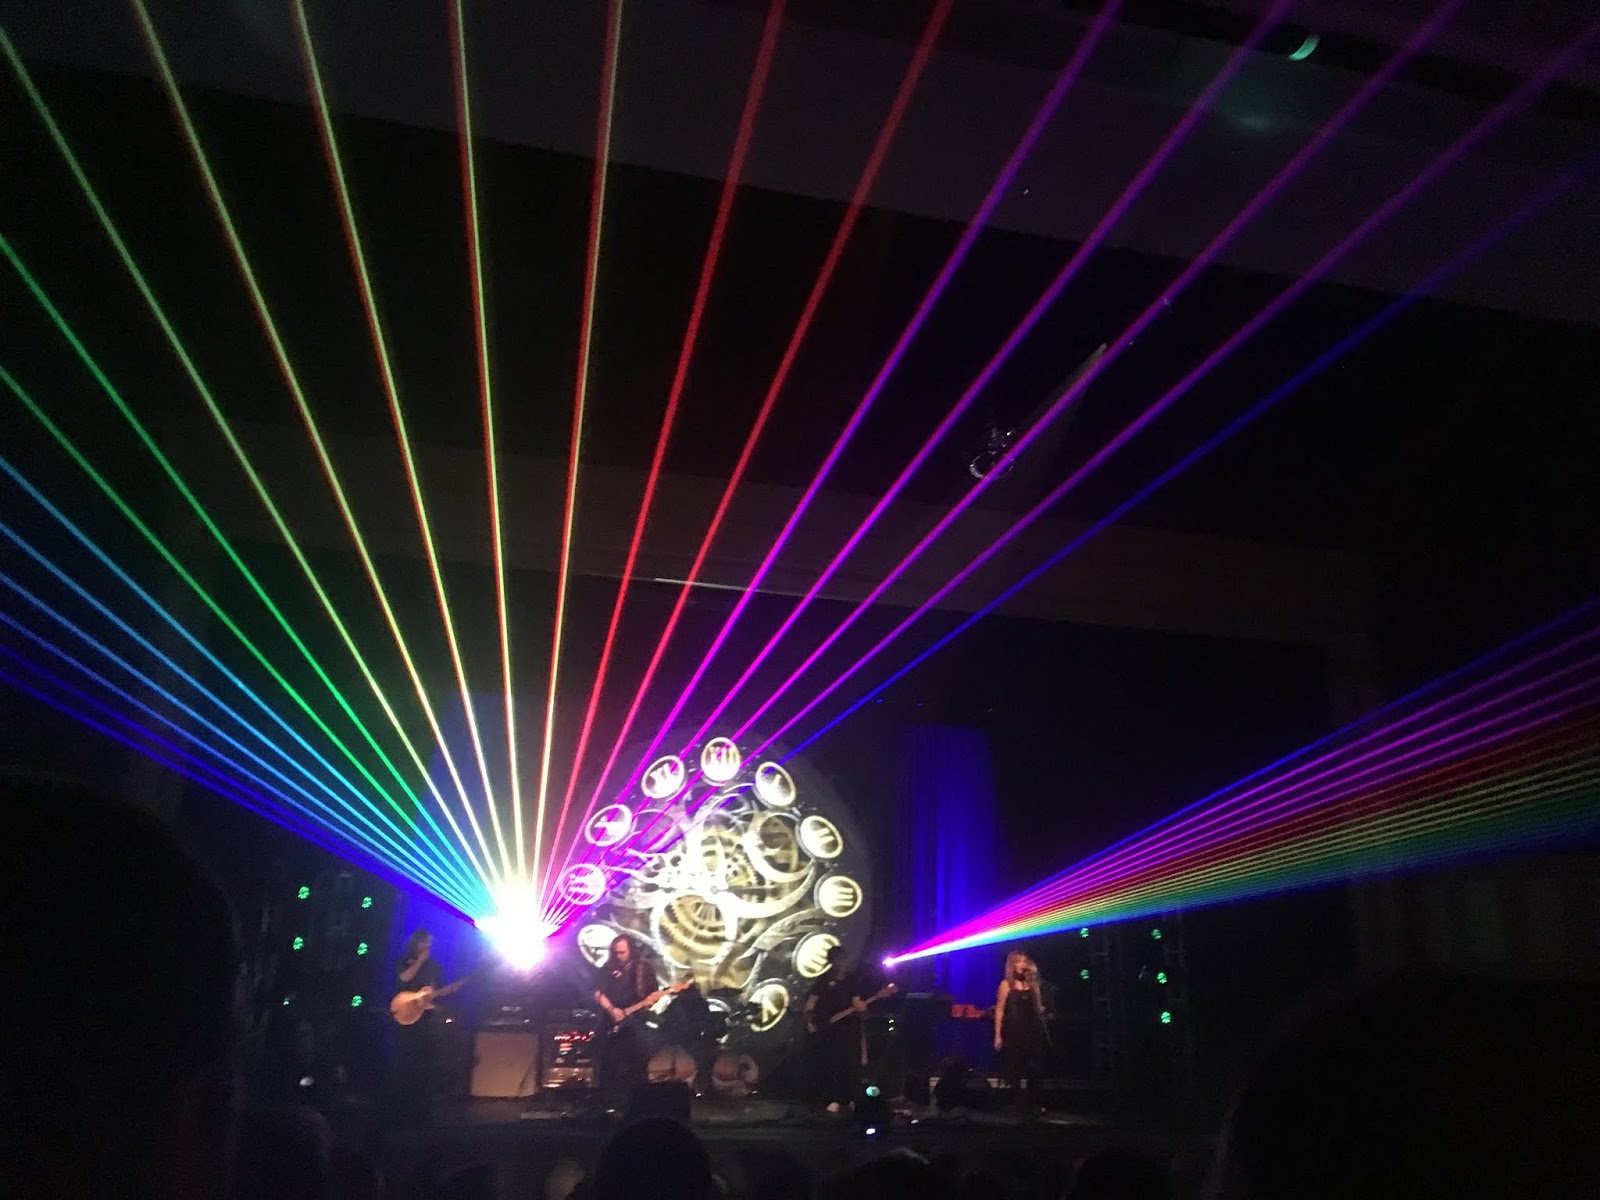 Buick City Complex: PIGS (Pink Floyd Tribute) at the Harbourfront